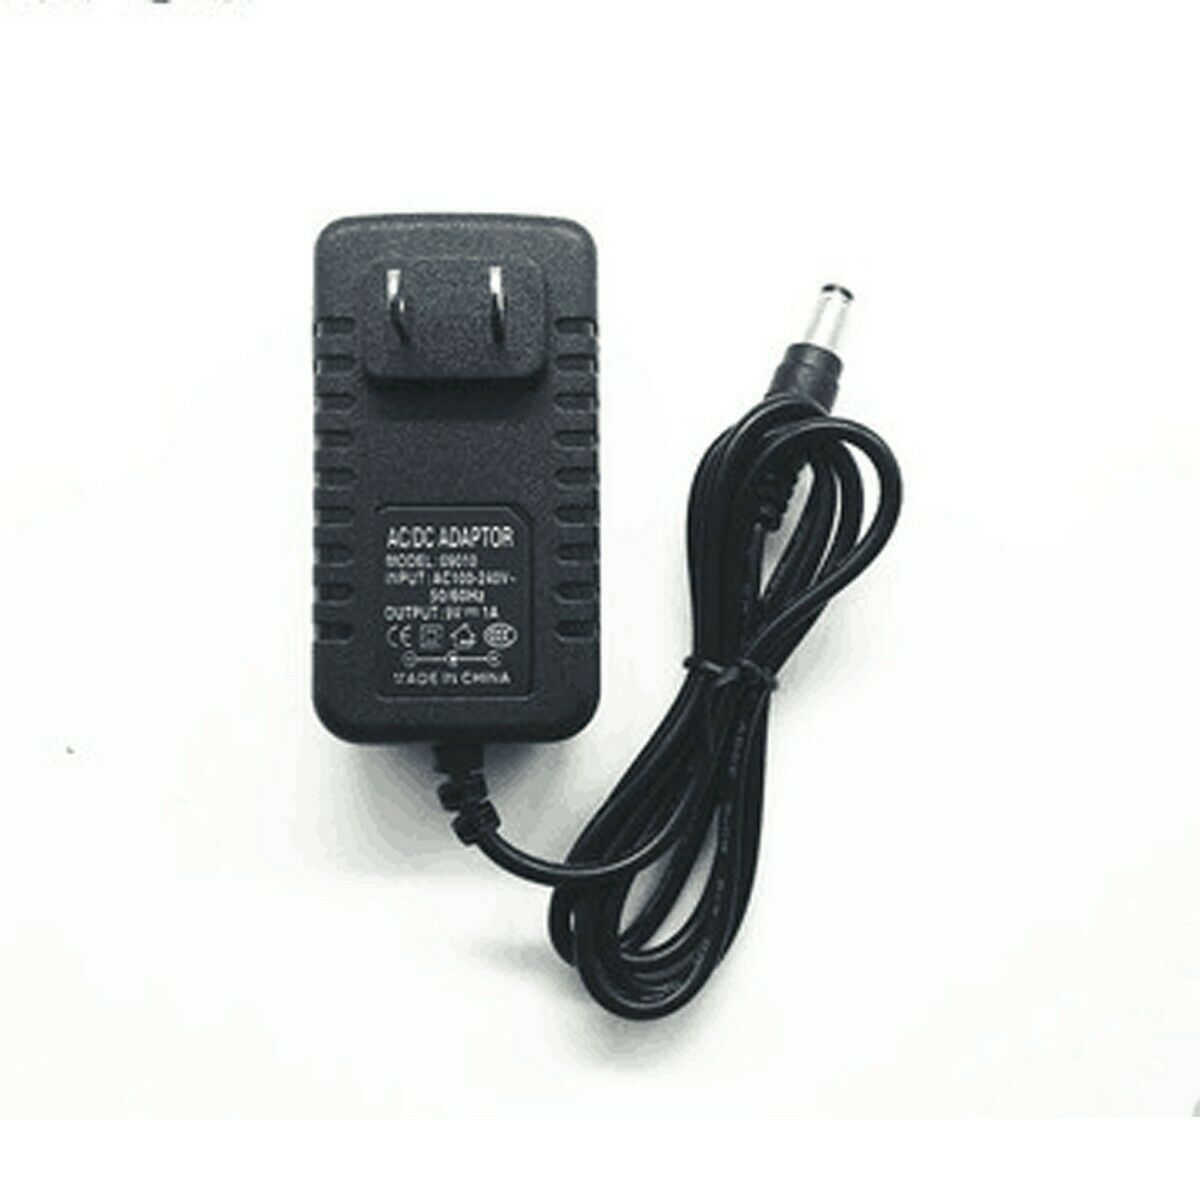 AC - DC Adapter For Honeywell 46-00525 Power Supply MS95XX VOYAGER 1200G 4600525